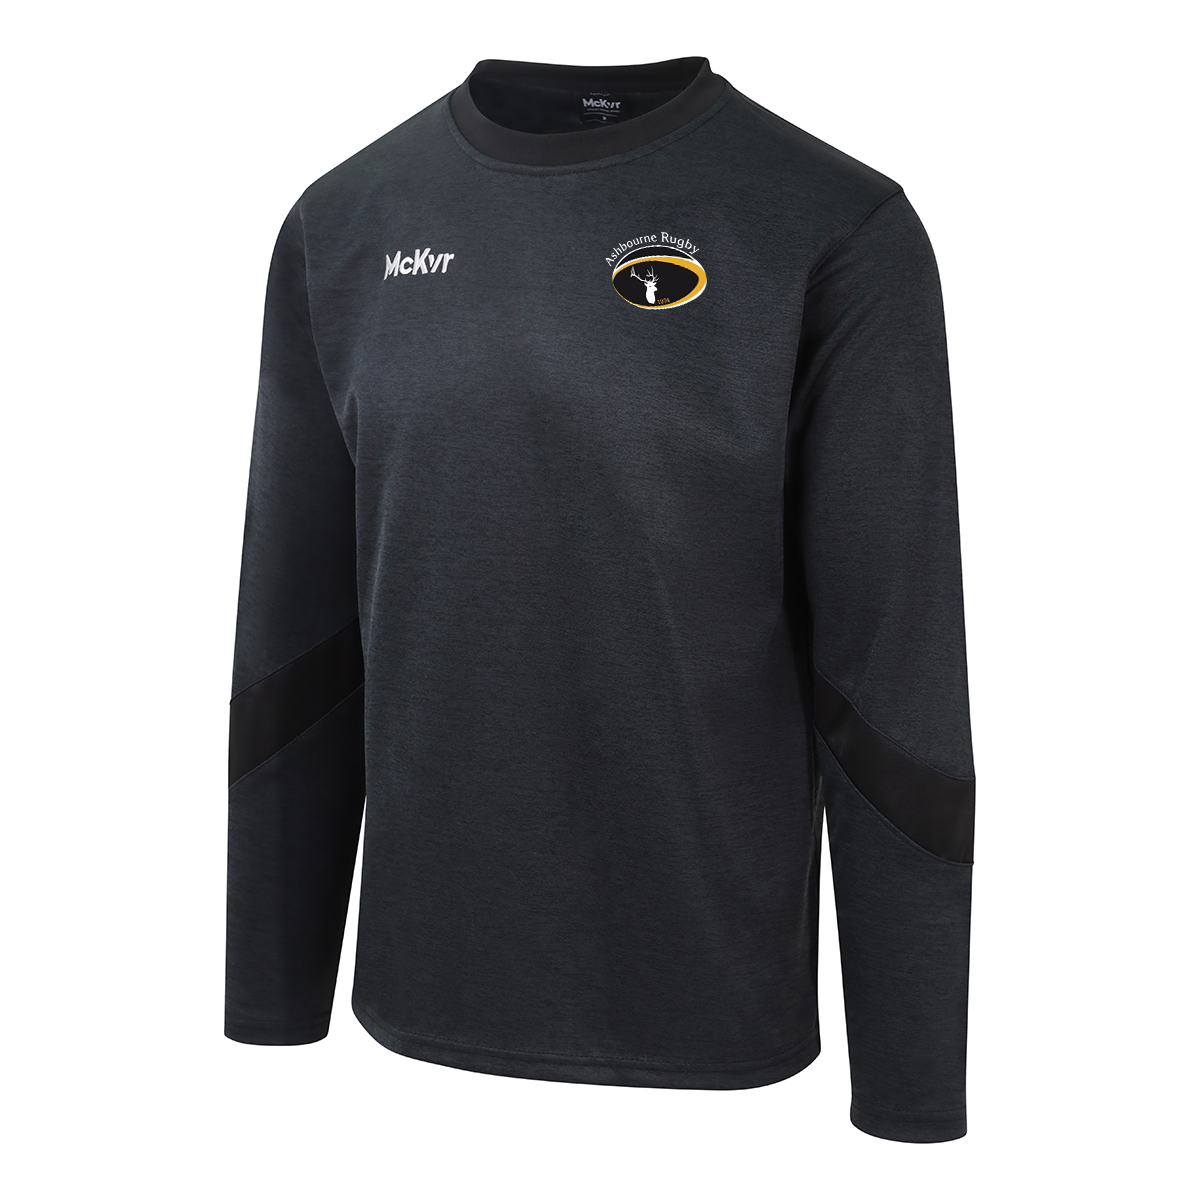 Mc Keever Ashbourne Rugby Core 22 Sweat Top - Youth - Black